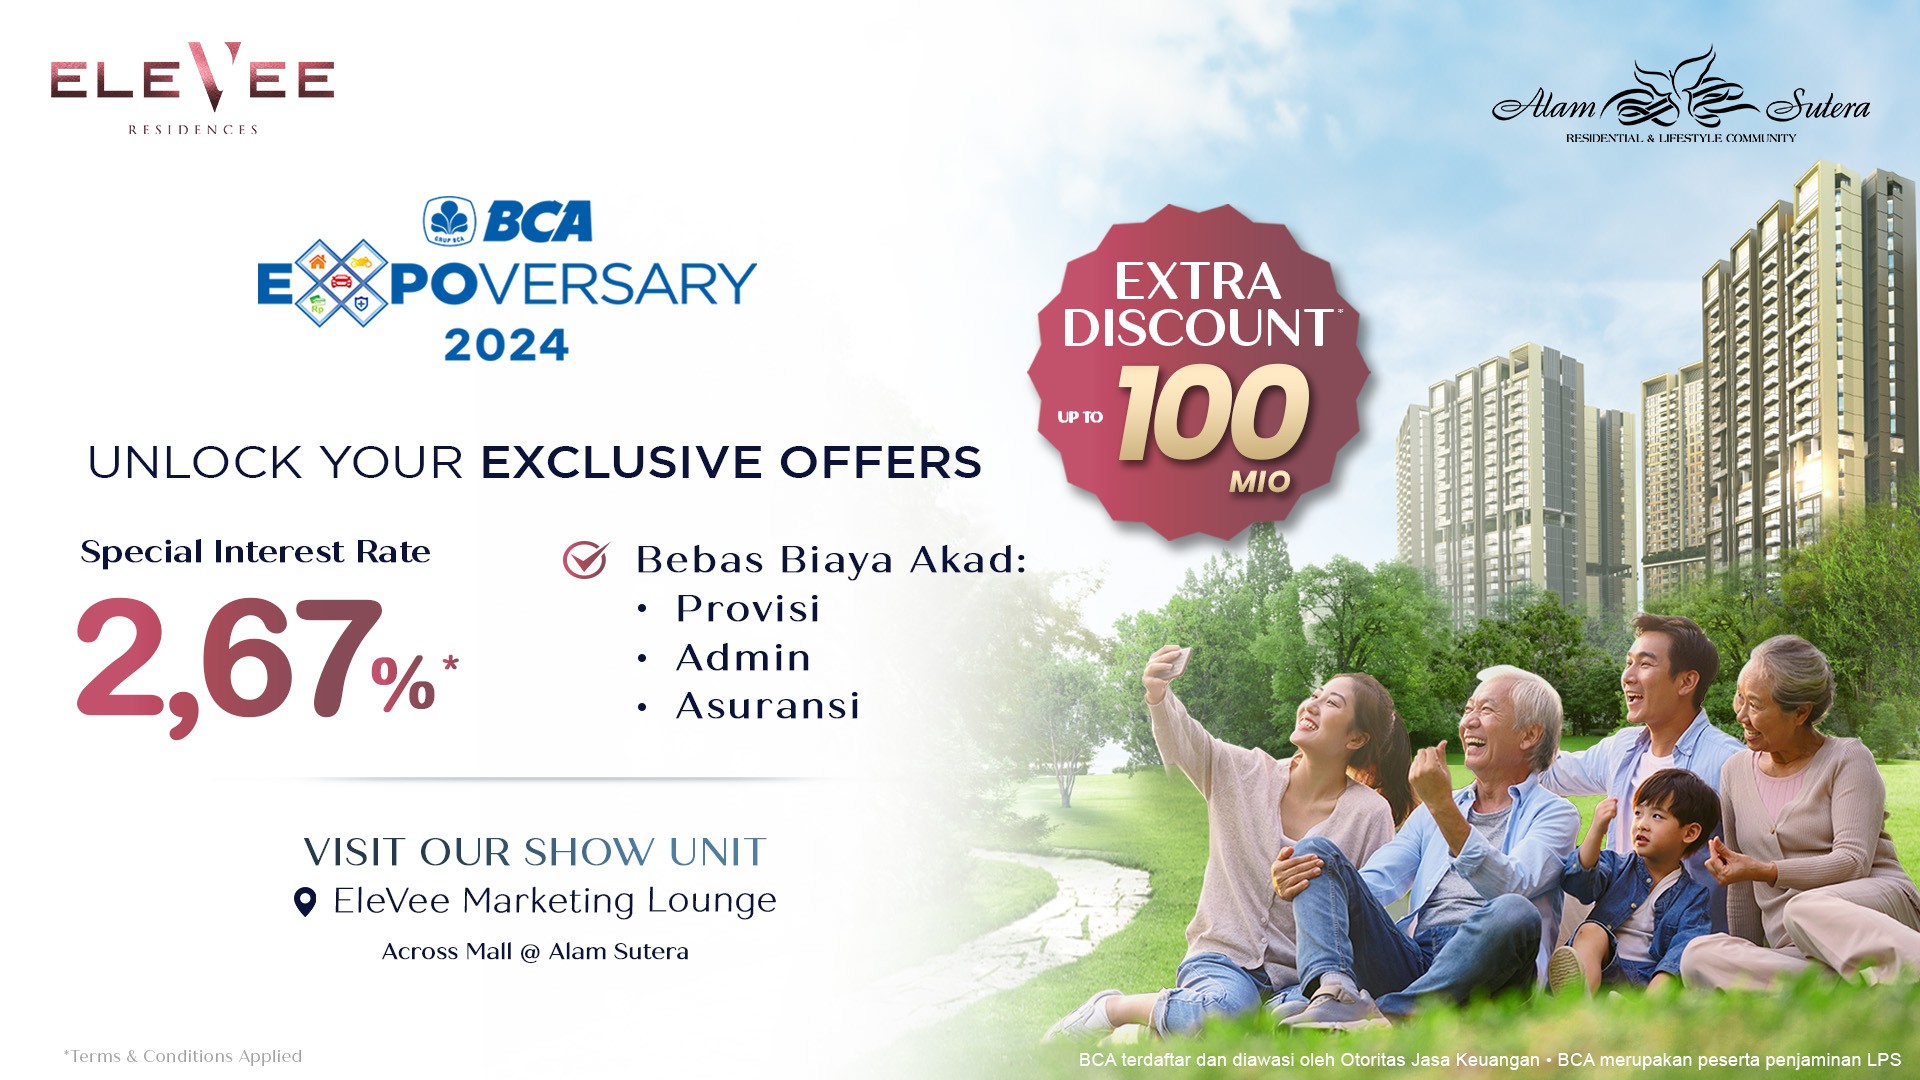 Find Us on BCA EXPO 2024!